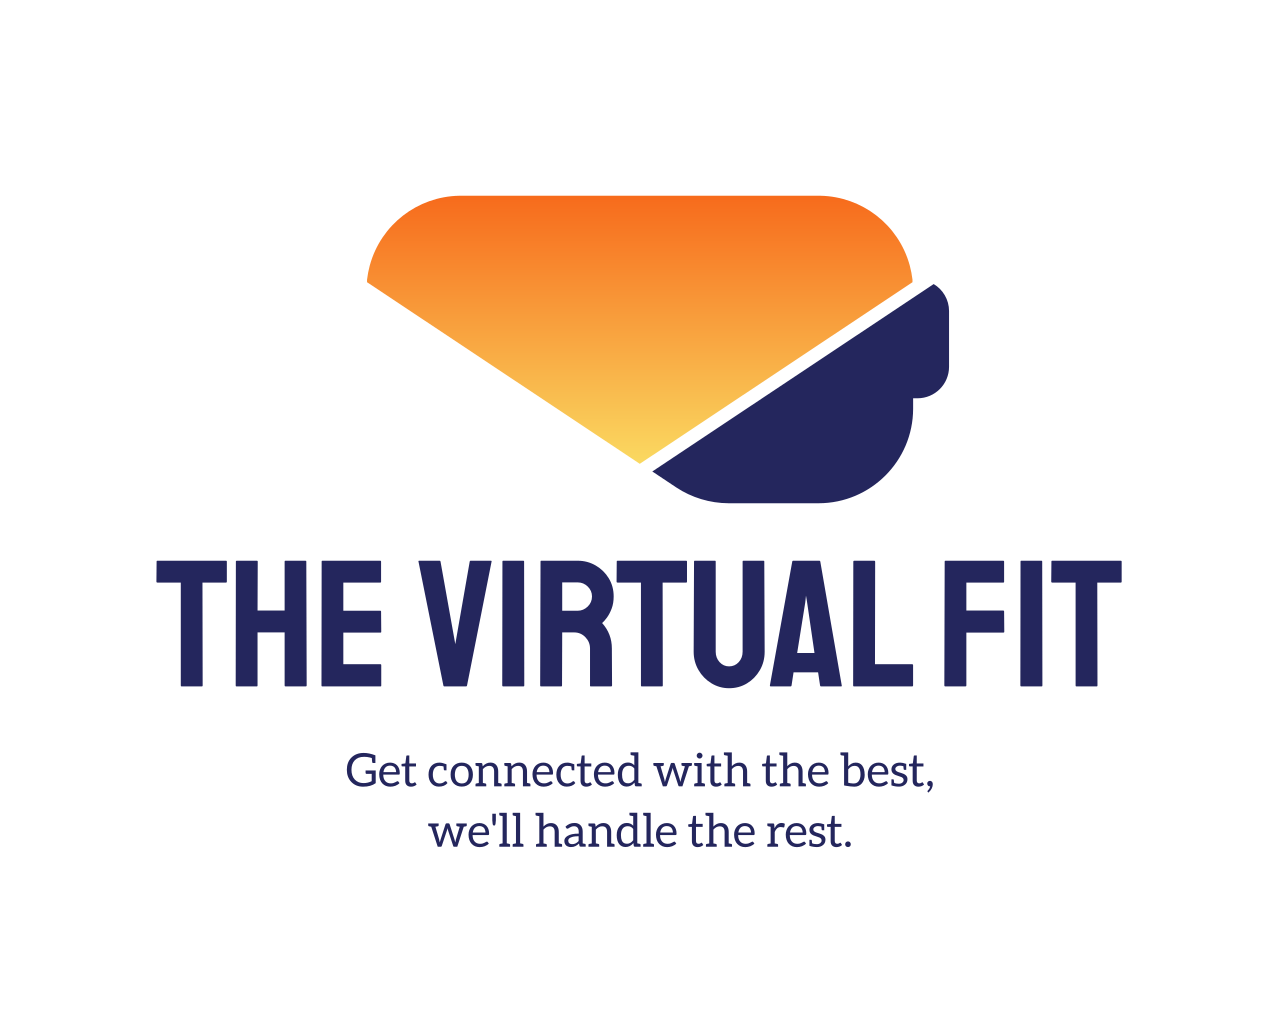 Welcome to The Virtual Fit.